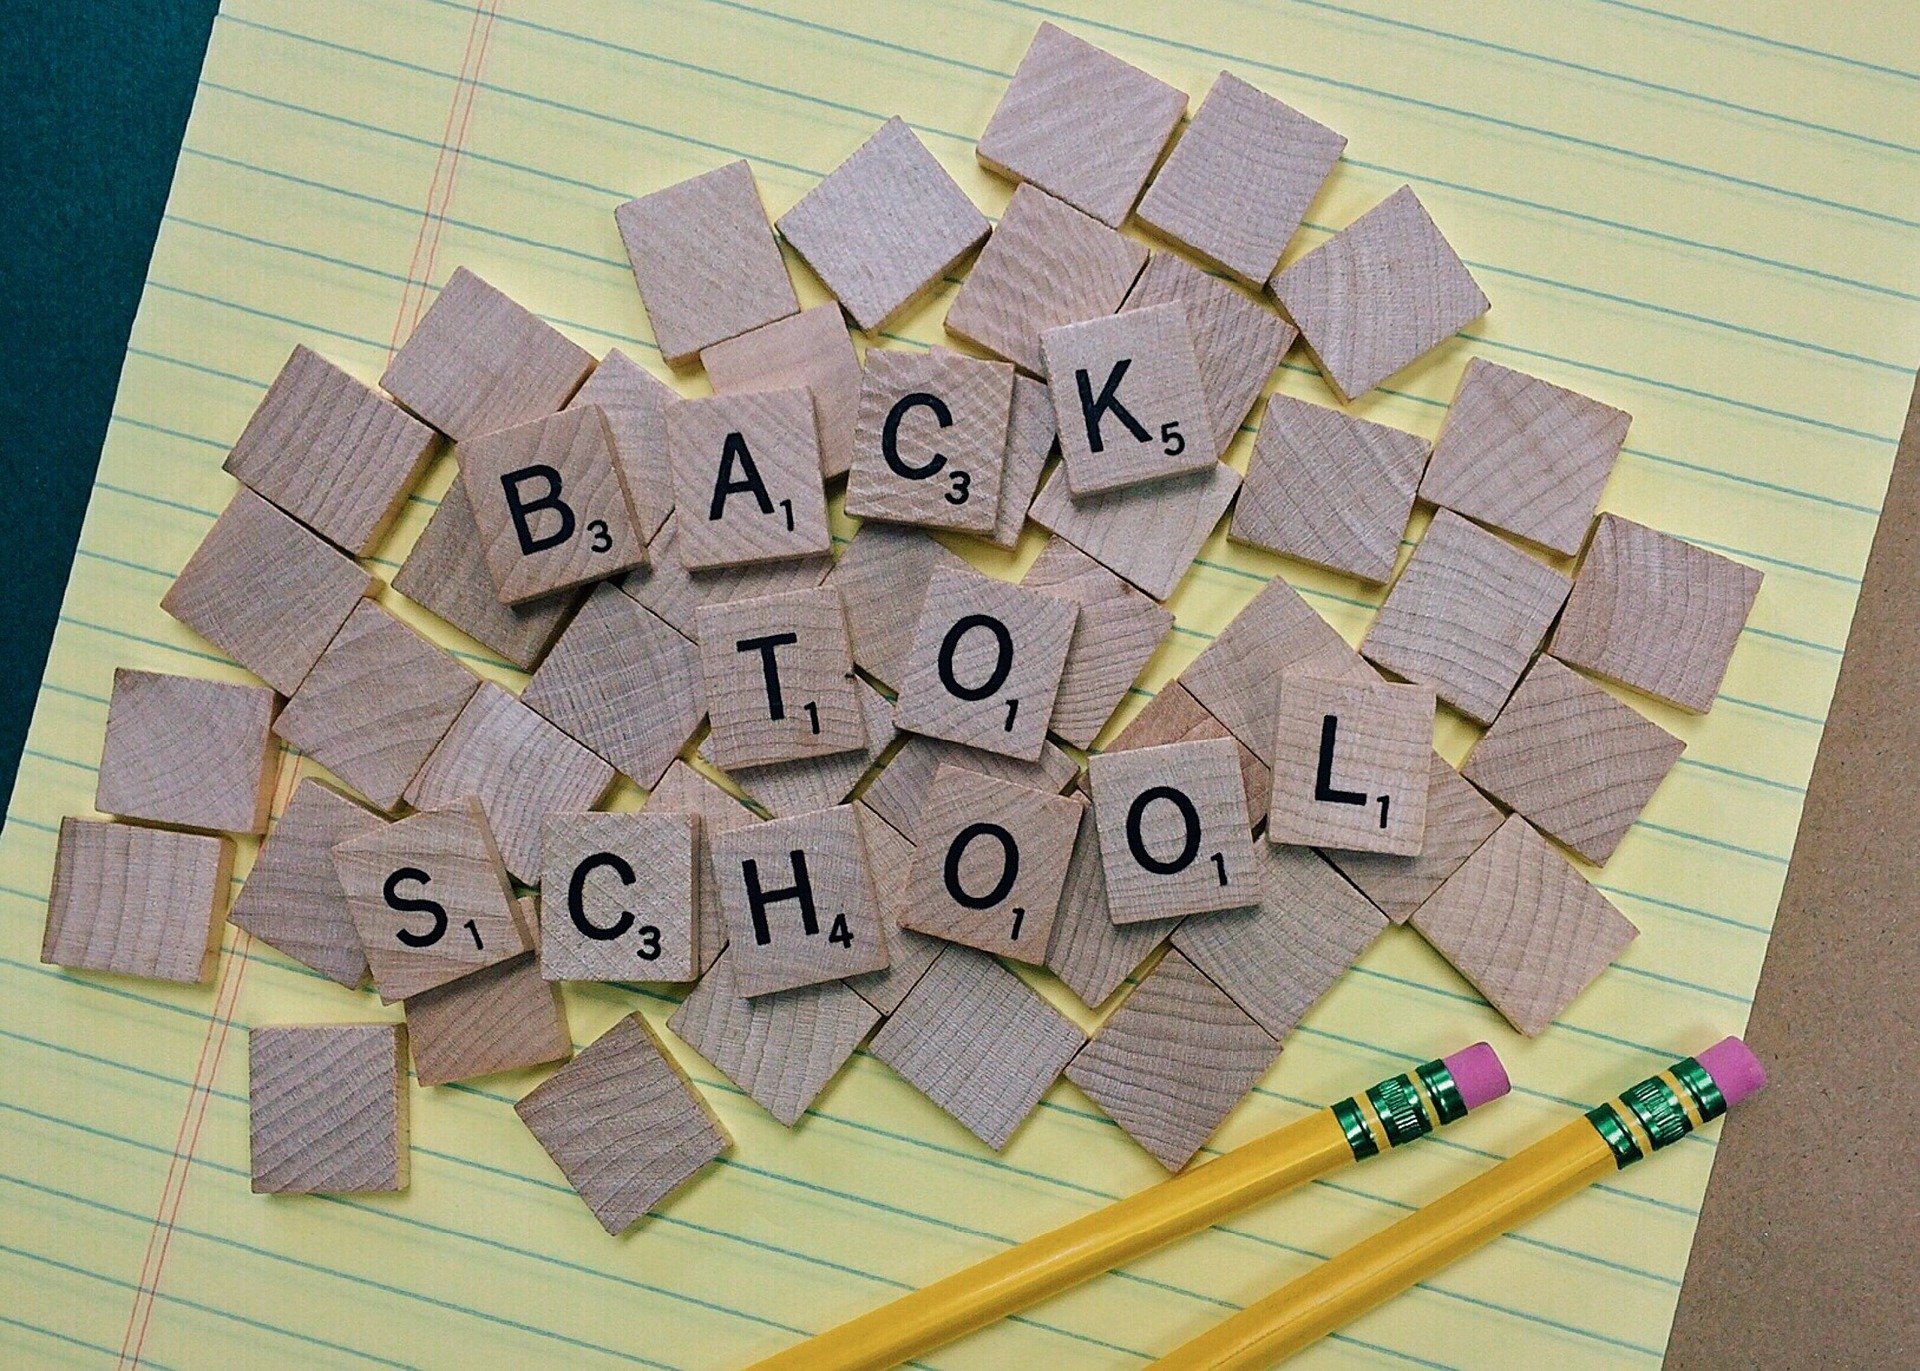 Back to School Resources